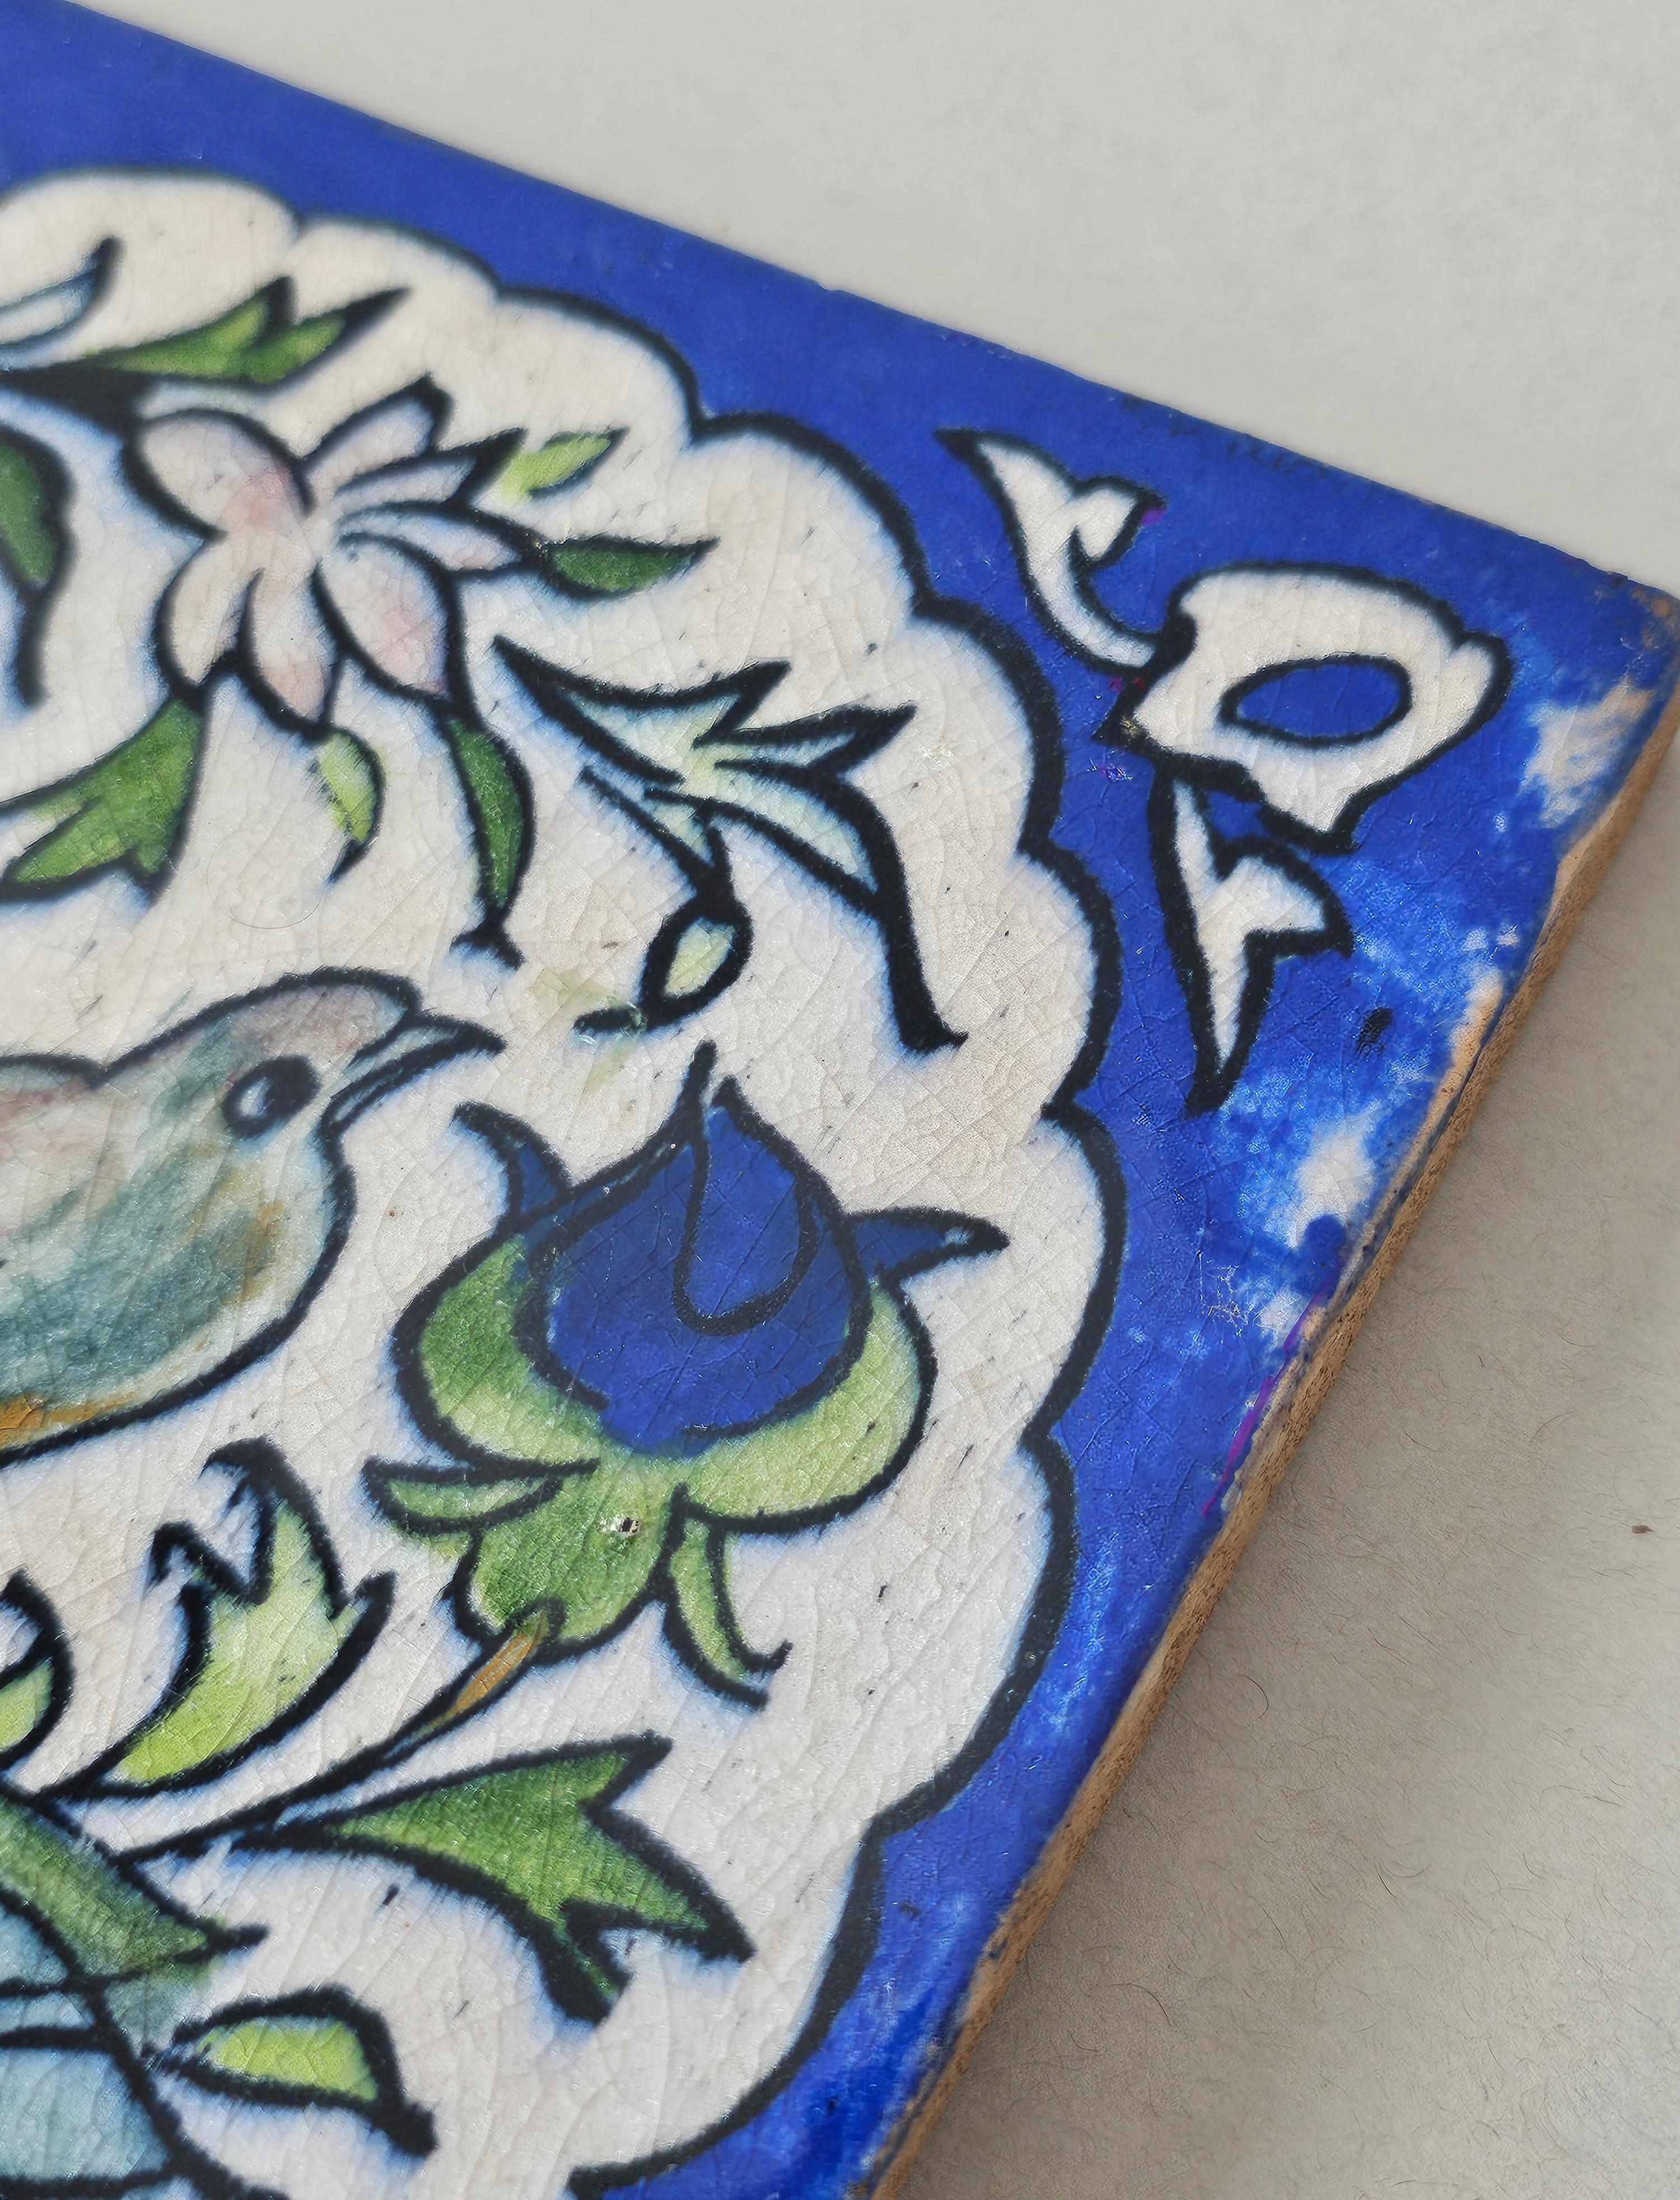 19th Century Persian Hand Painted Ceramic Wall Tile  In Good Condition For Sale In Forney, TX